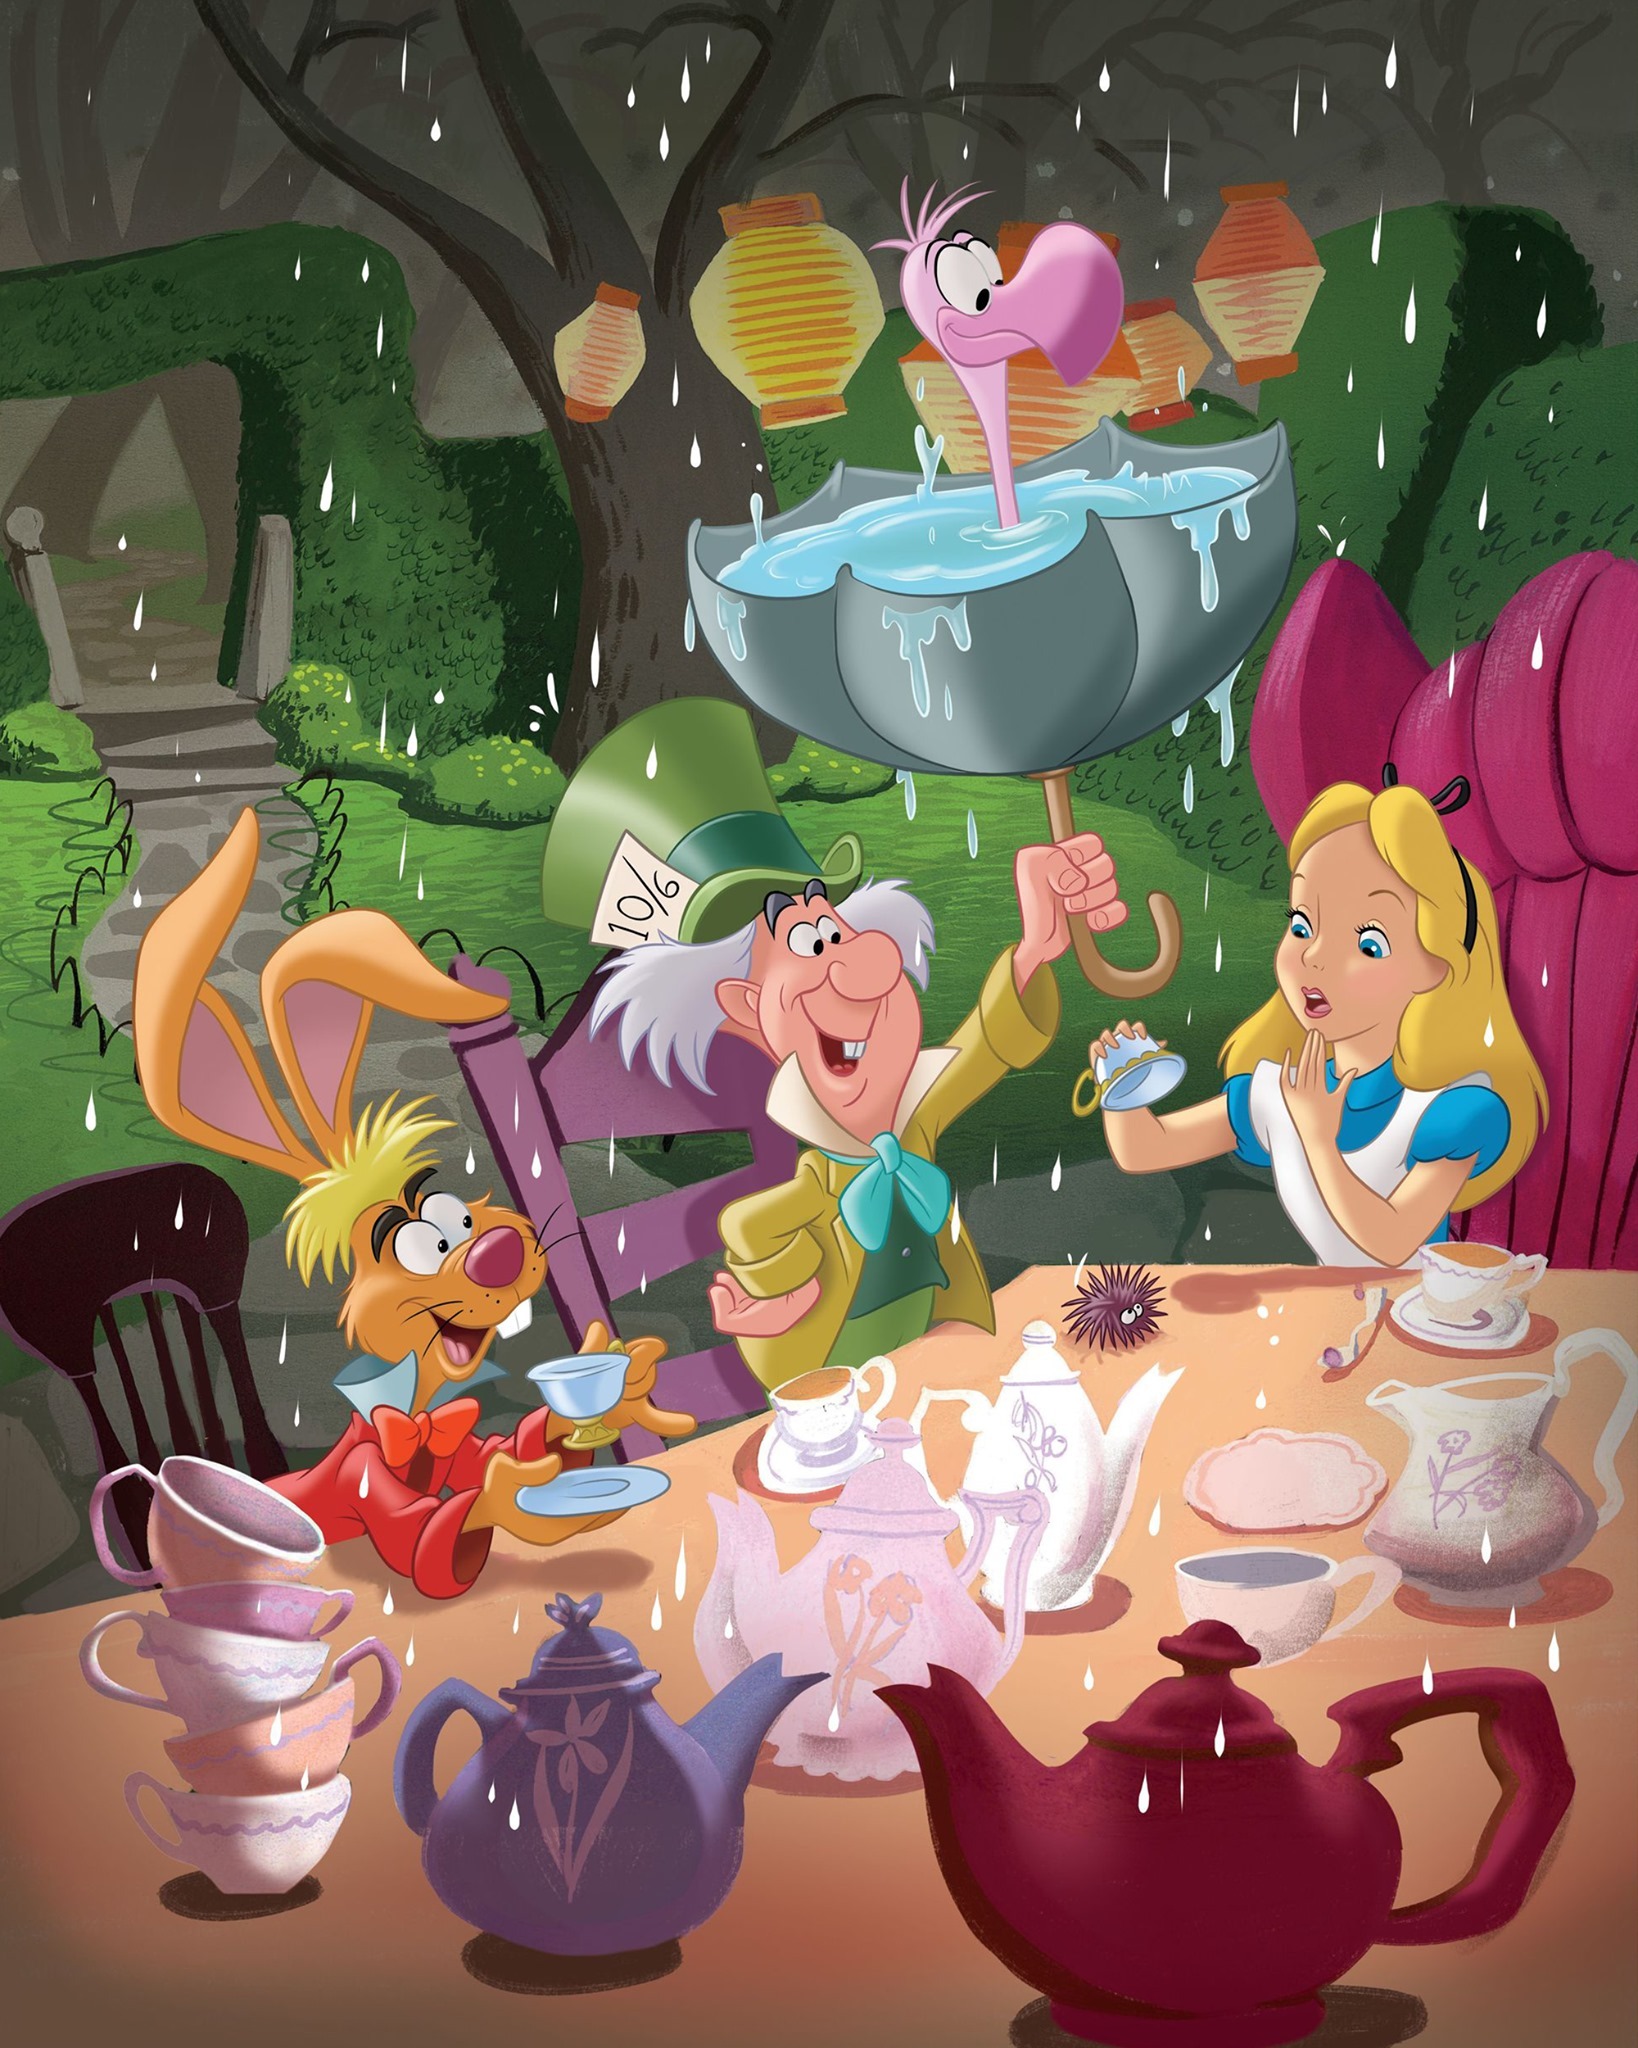 Disney on X: It's a very merry mad tea party in Wonderland! https